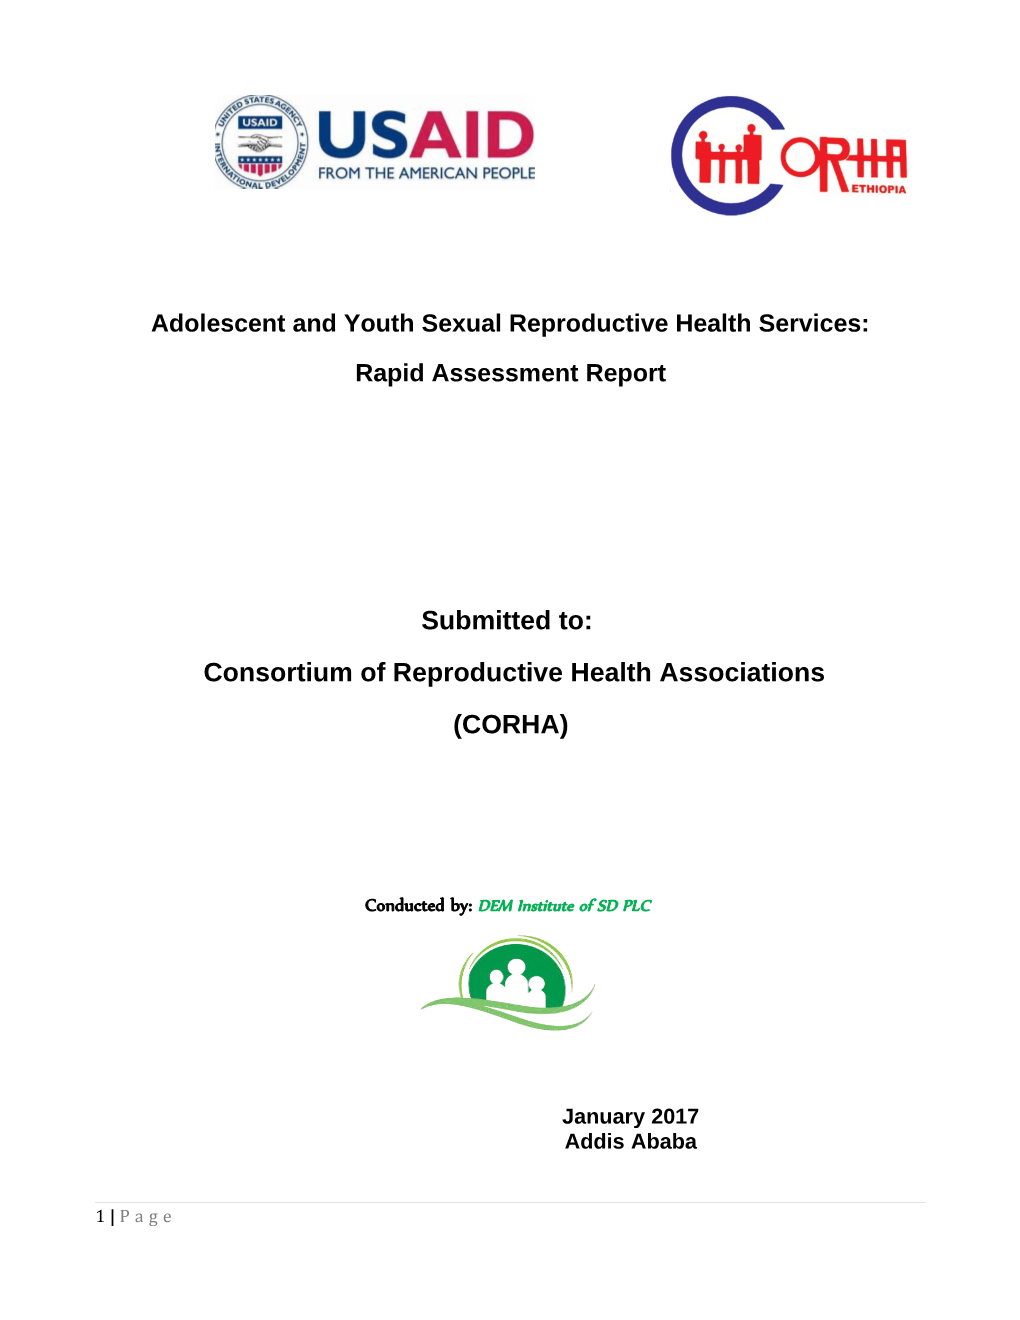 Adolescent and Youth Sexual Reproductive Health Services